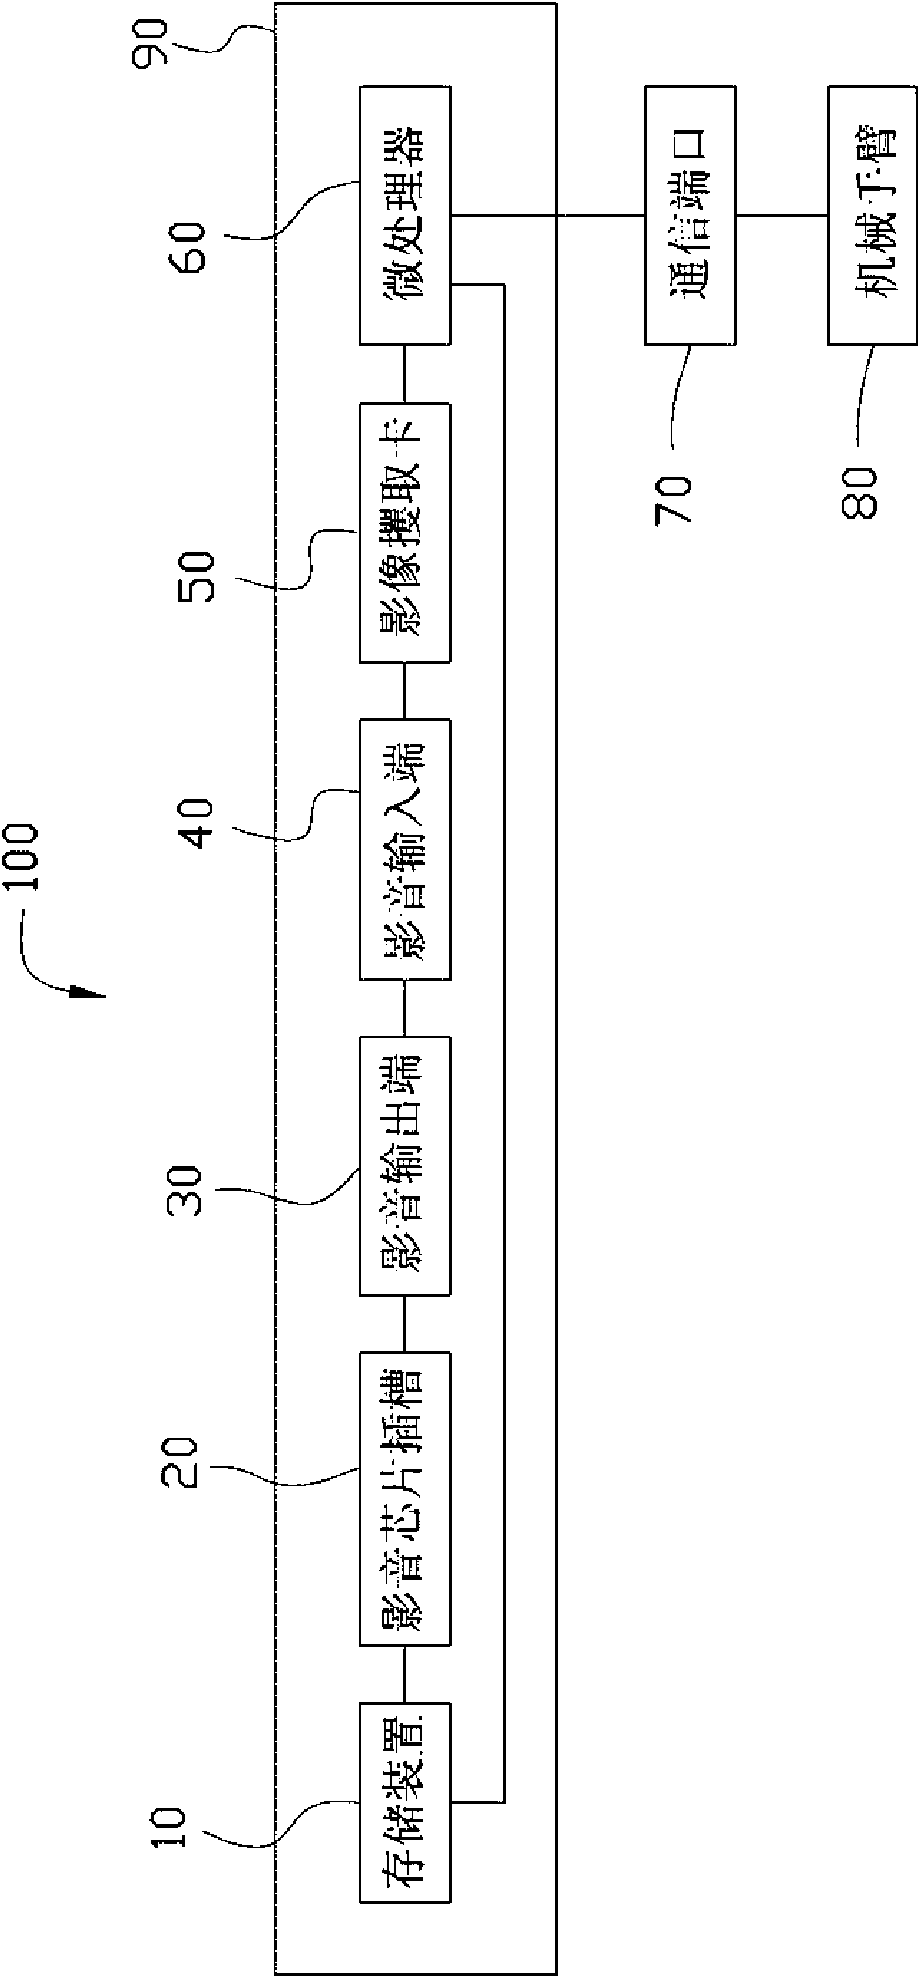 Audio-visual chip detection system and method